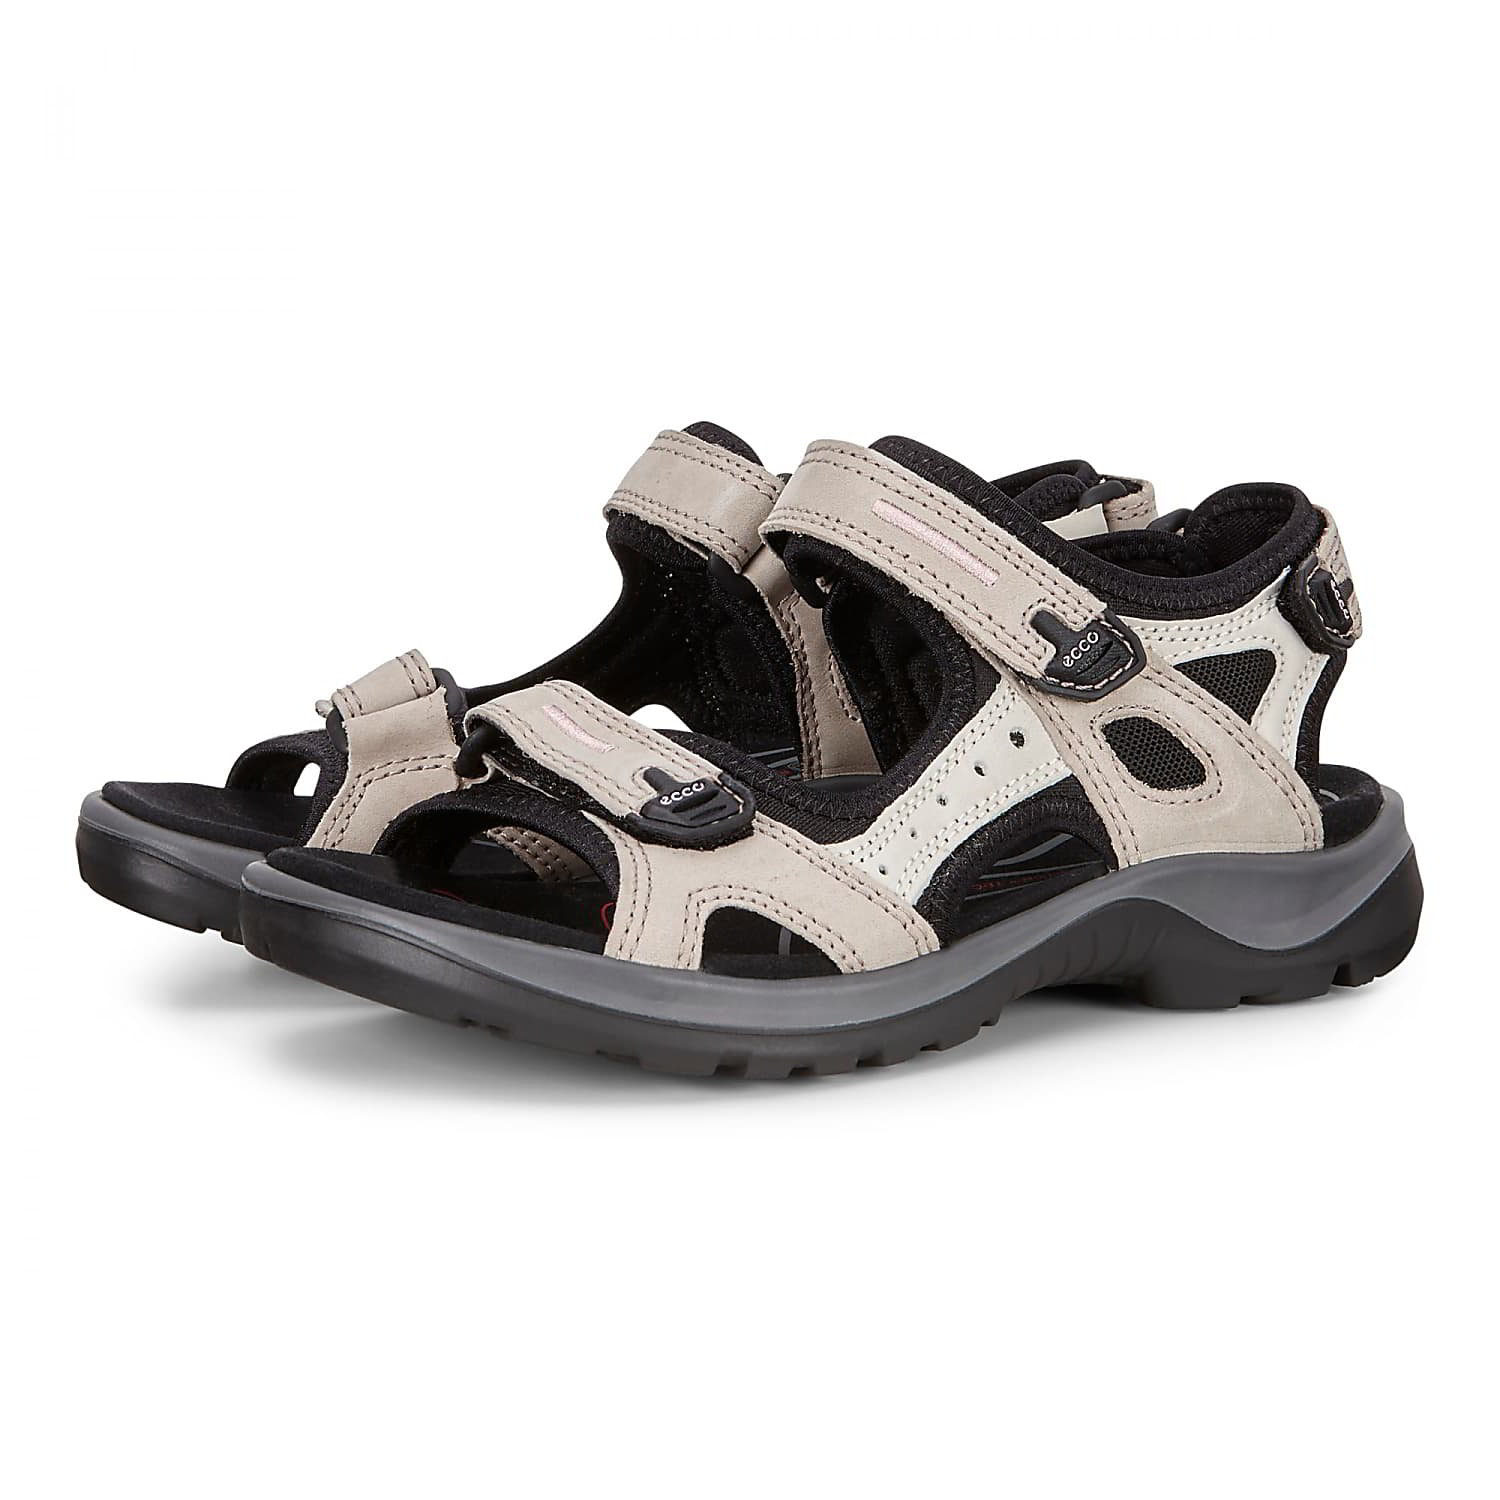 Ecco Shoes Womens Offroad Leather Walking Sandals - Atmosphere Ice Black 2951